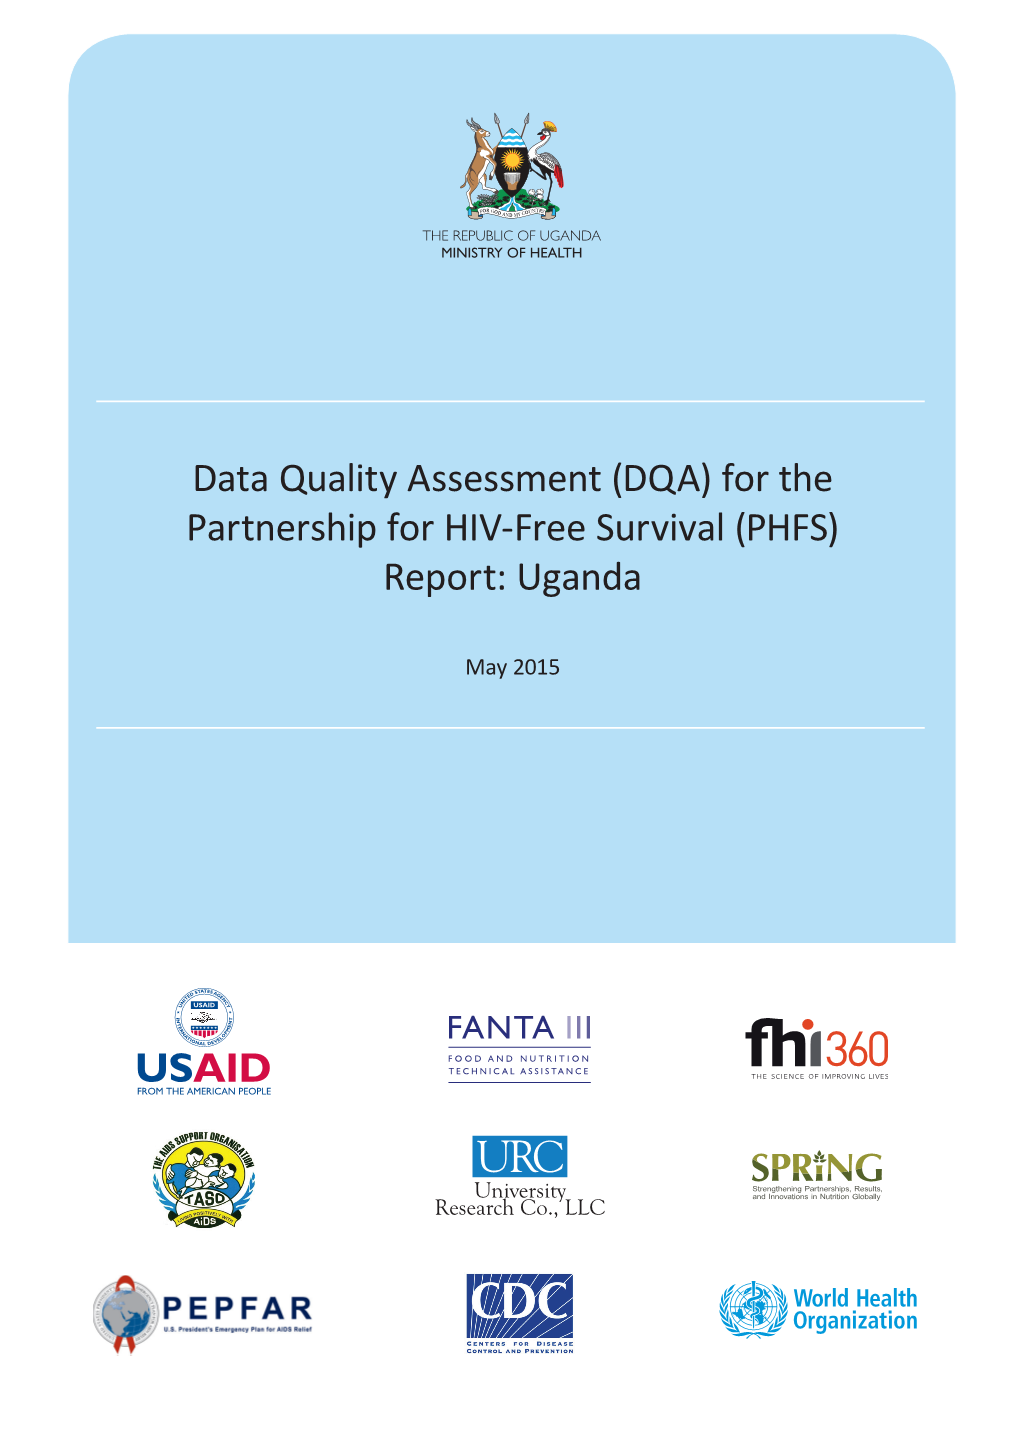 Data Quality Assessment (DQA) for the Partnership for HIV-Free Survival (PHFS) Report: Uganda